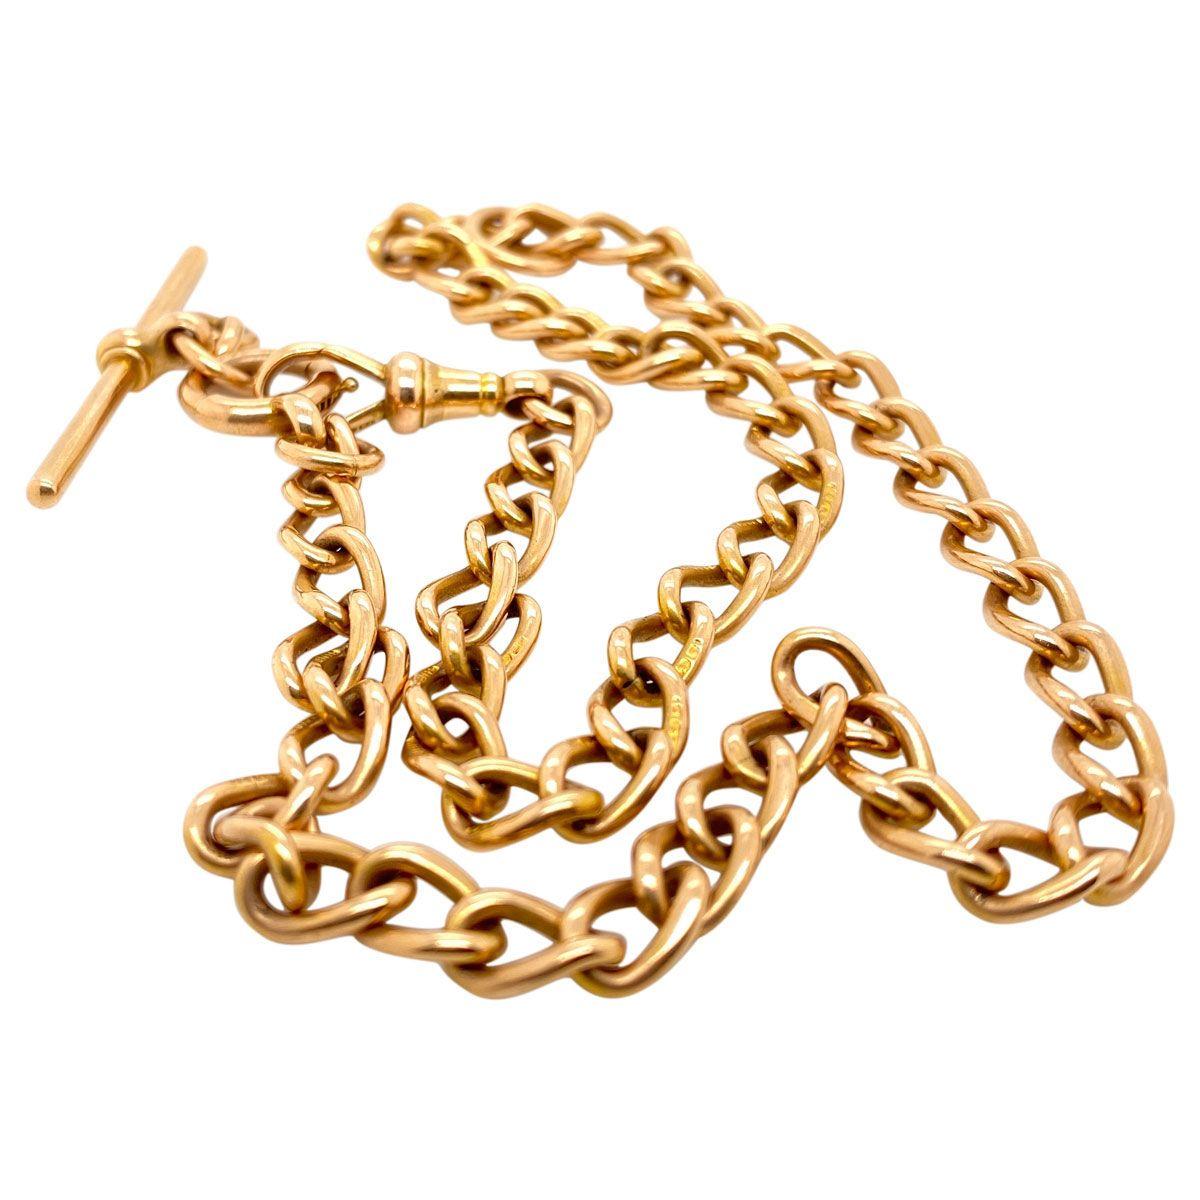 A must for every jewellery collection, the classic fob chain. This one is an original bearing all the hallmarks of an early English piece in 15 karat gold, which is indeed rare. 15 karat gold was discontinued in England in 1932 so this piece dates